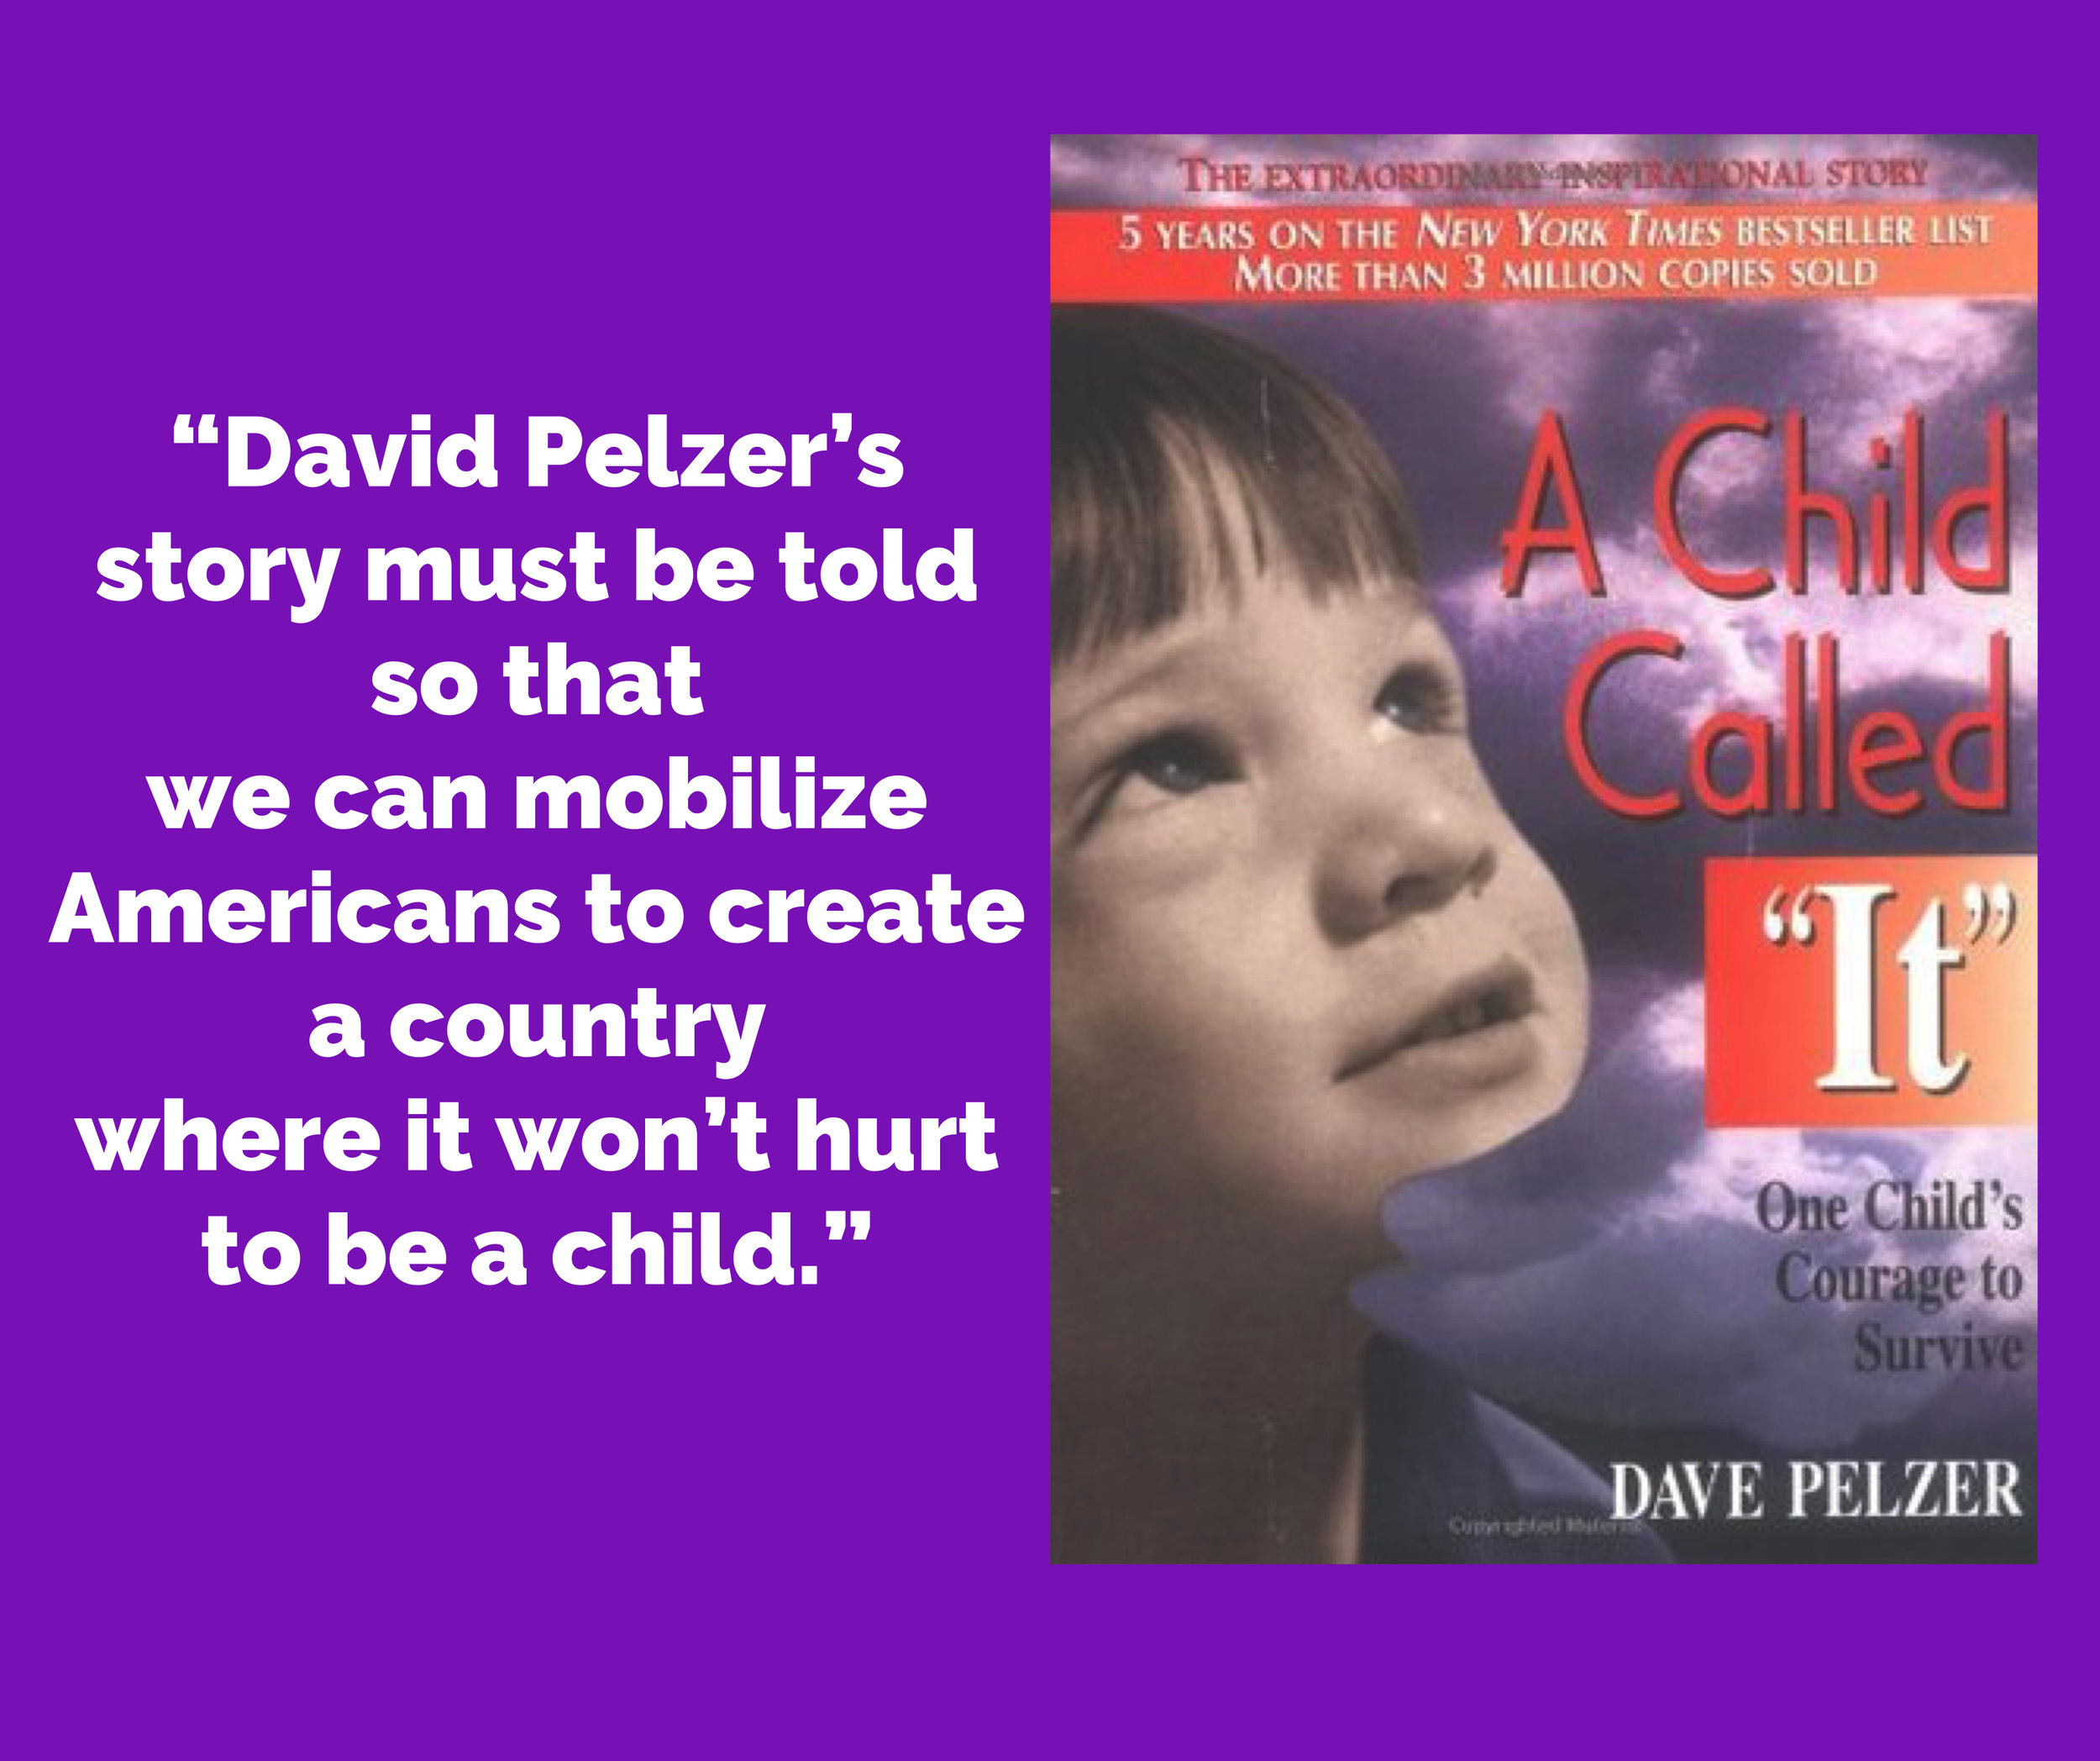 A Child Called It - Personal Biography by Dave Pelzer